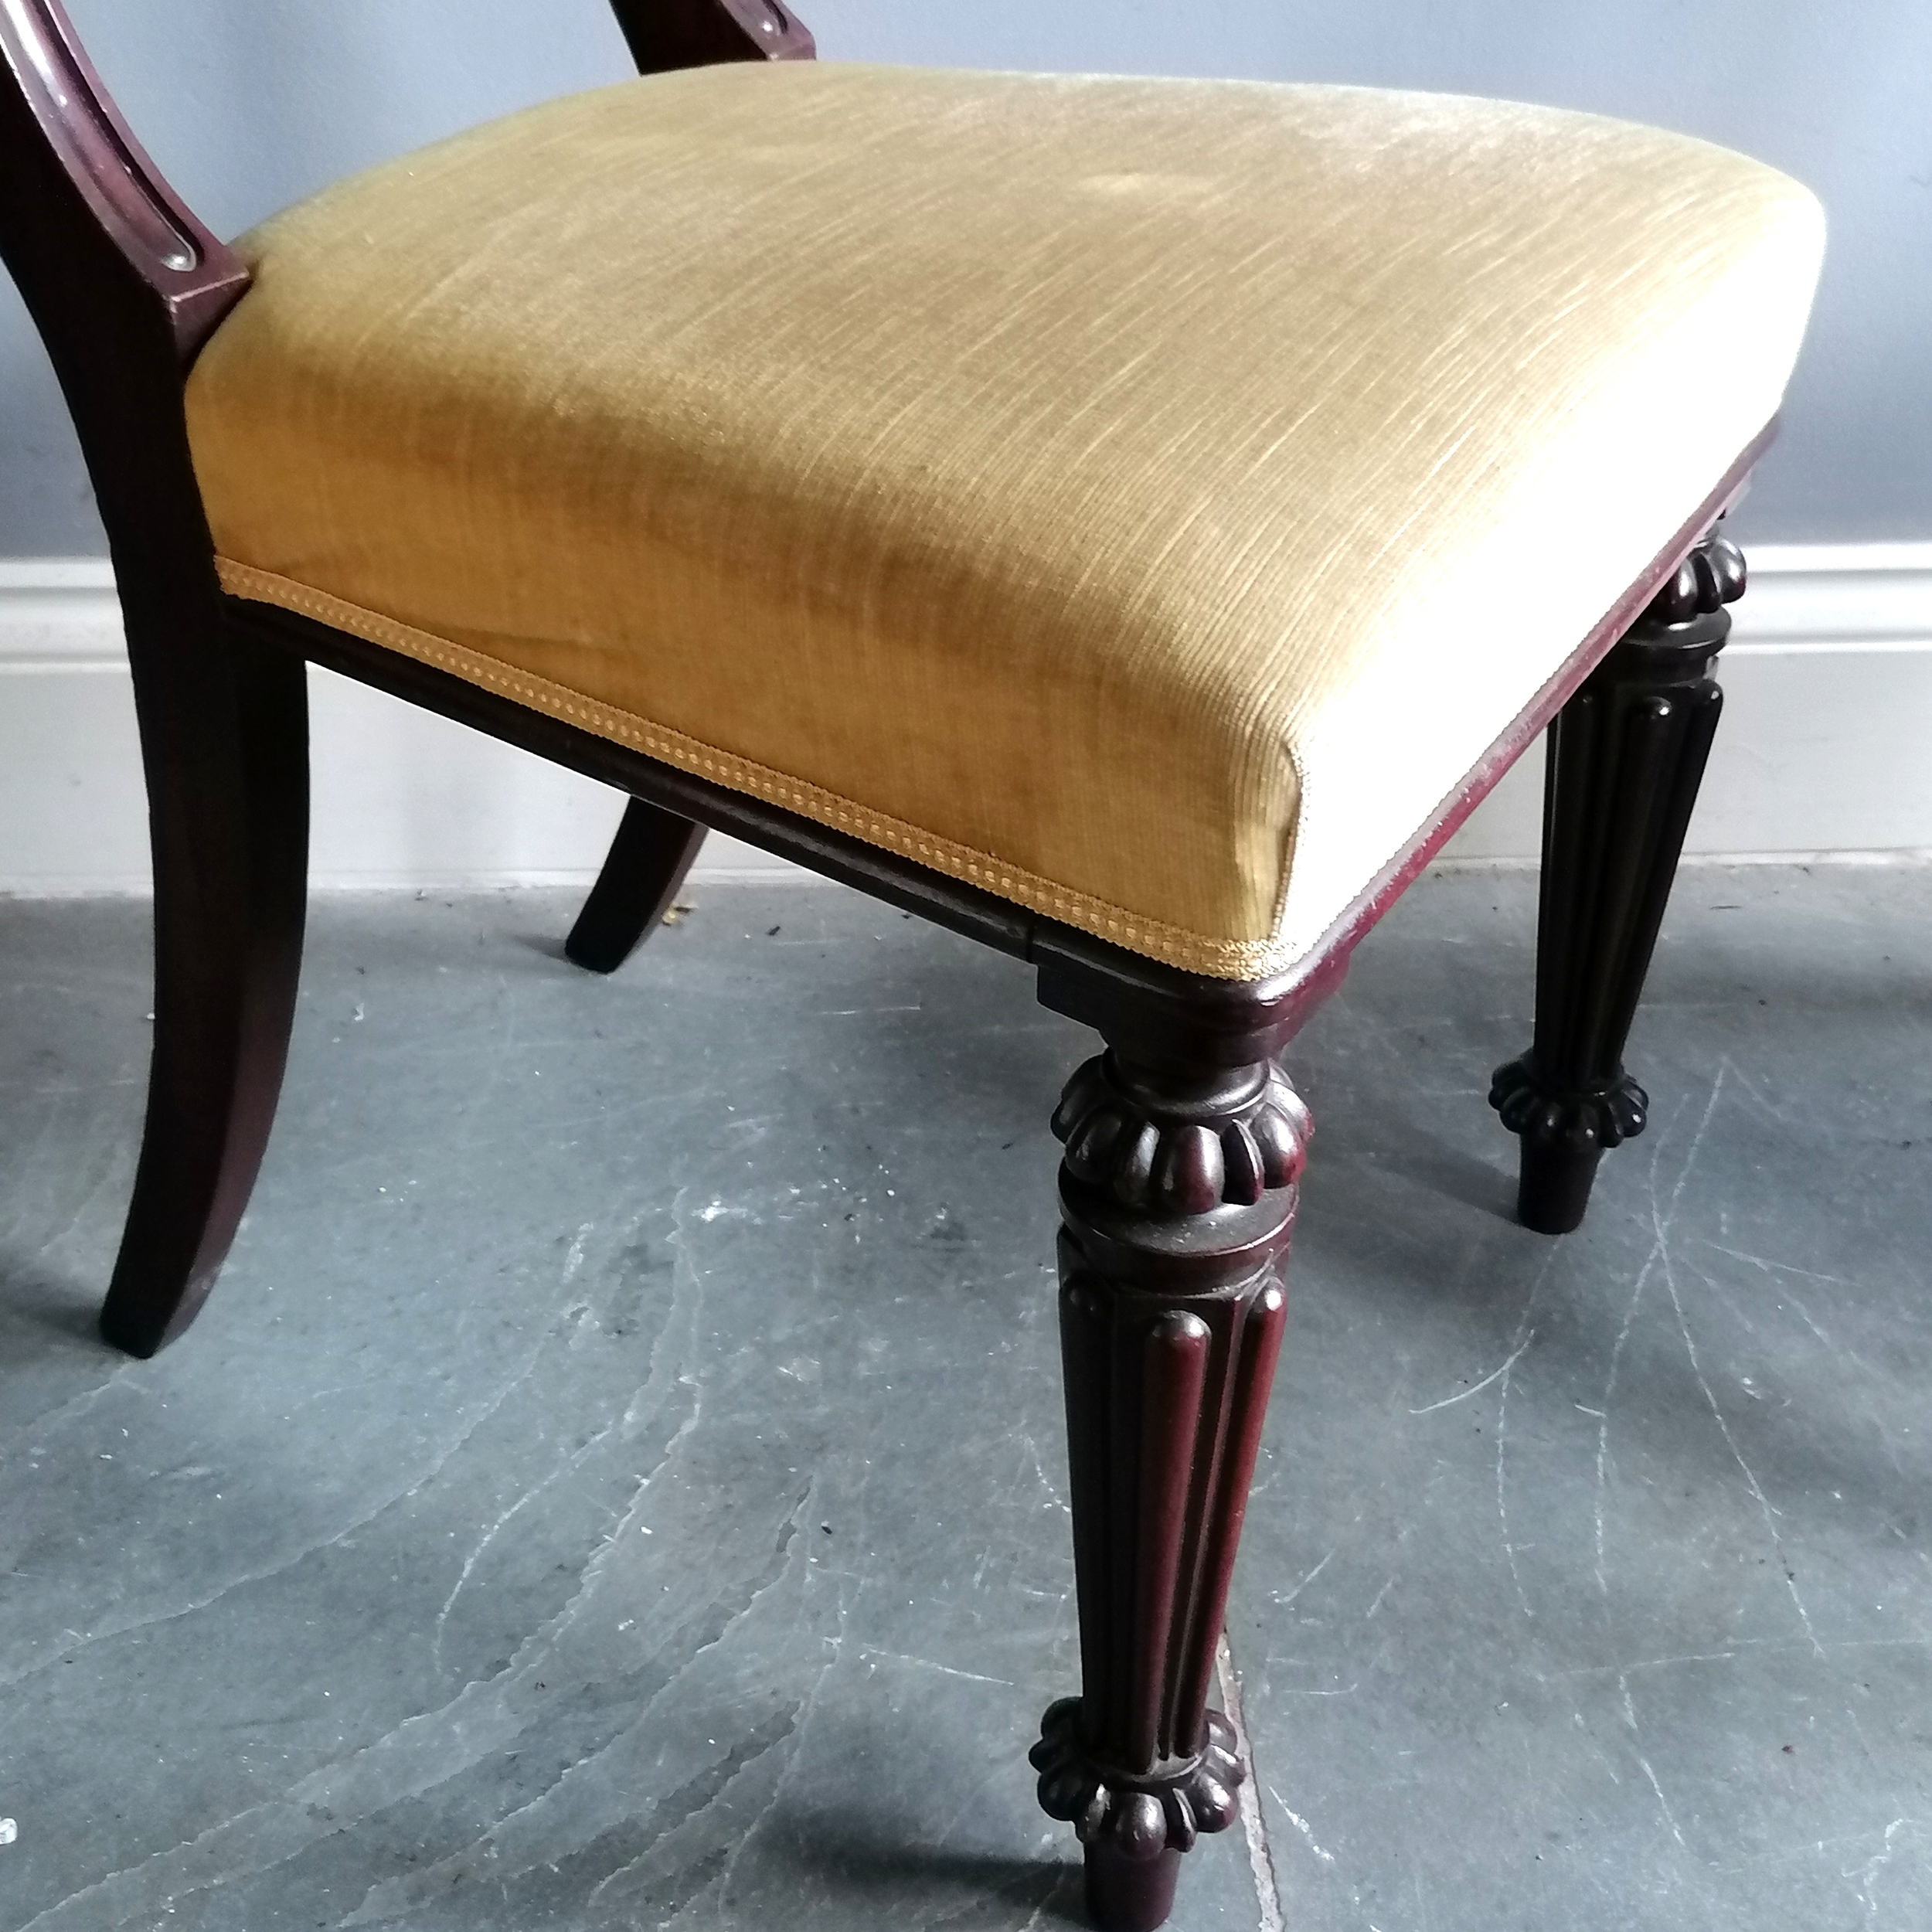 Set of 6 antique rosewood bar back dining chairs with upholstered seats 85cm high x 48cm wide x 43cm - Image 4 of 5